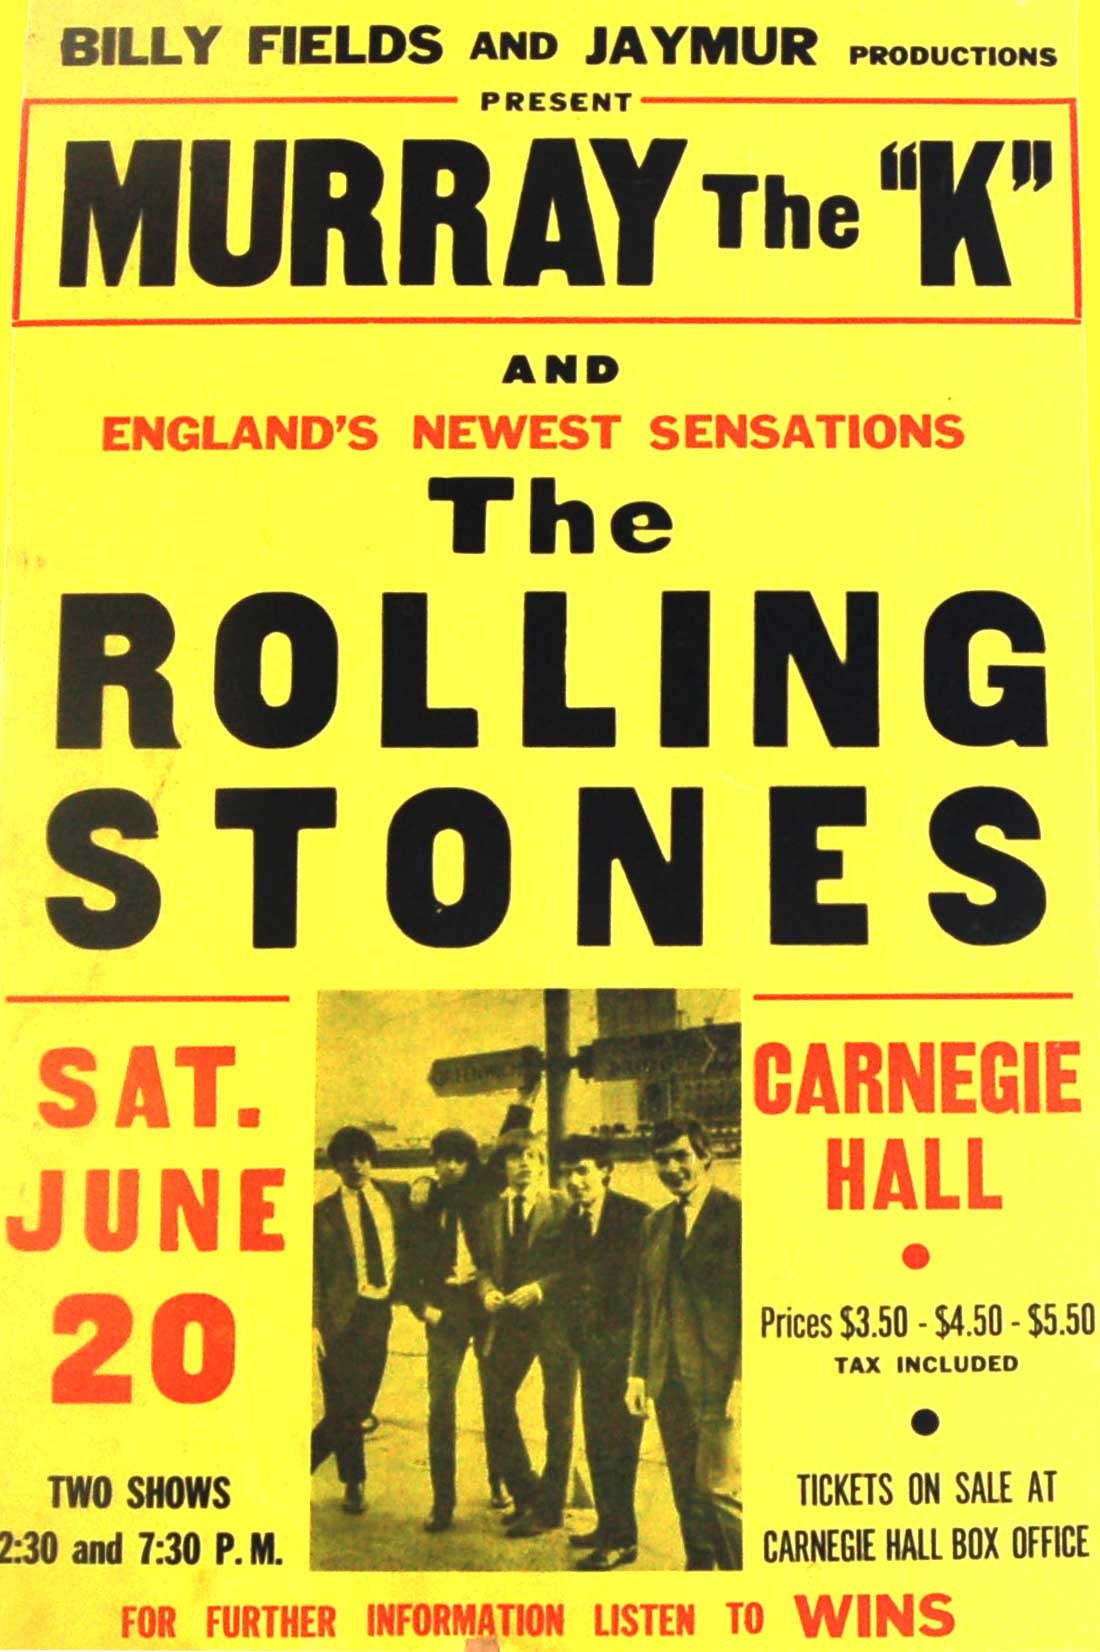 Vintage Music Art Poster - The Rolling Stones - 0590